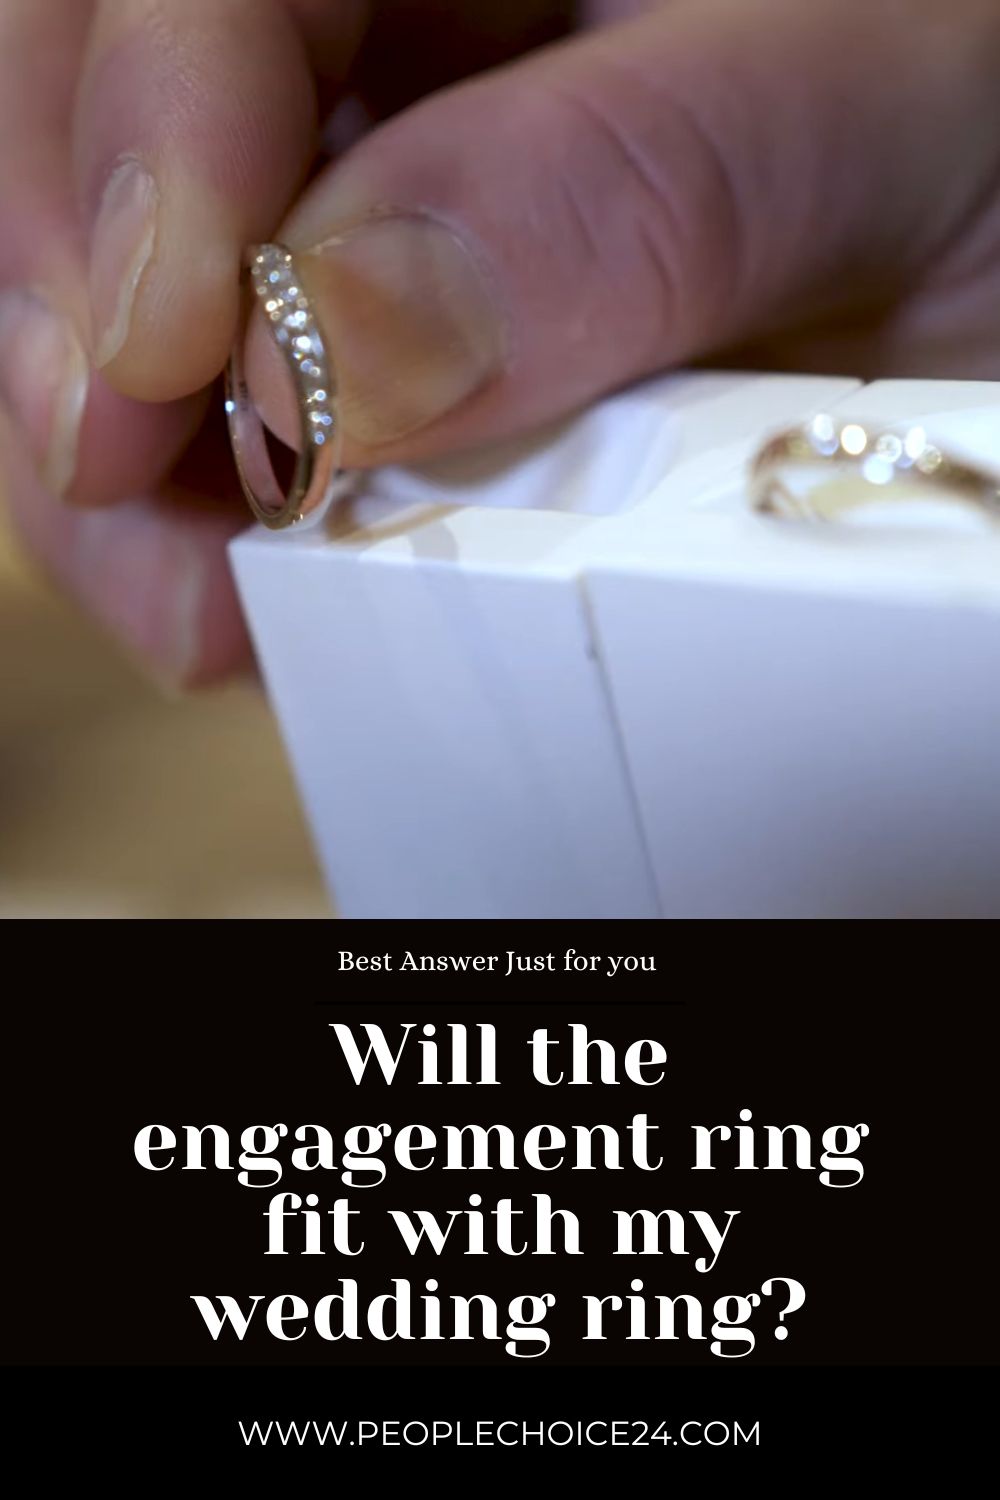 Will the engagement ring fit with my wedding ring